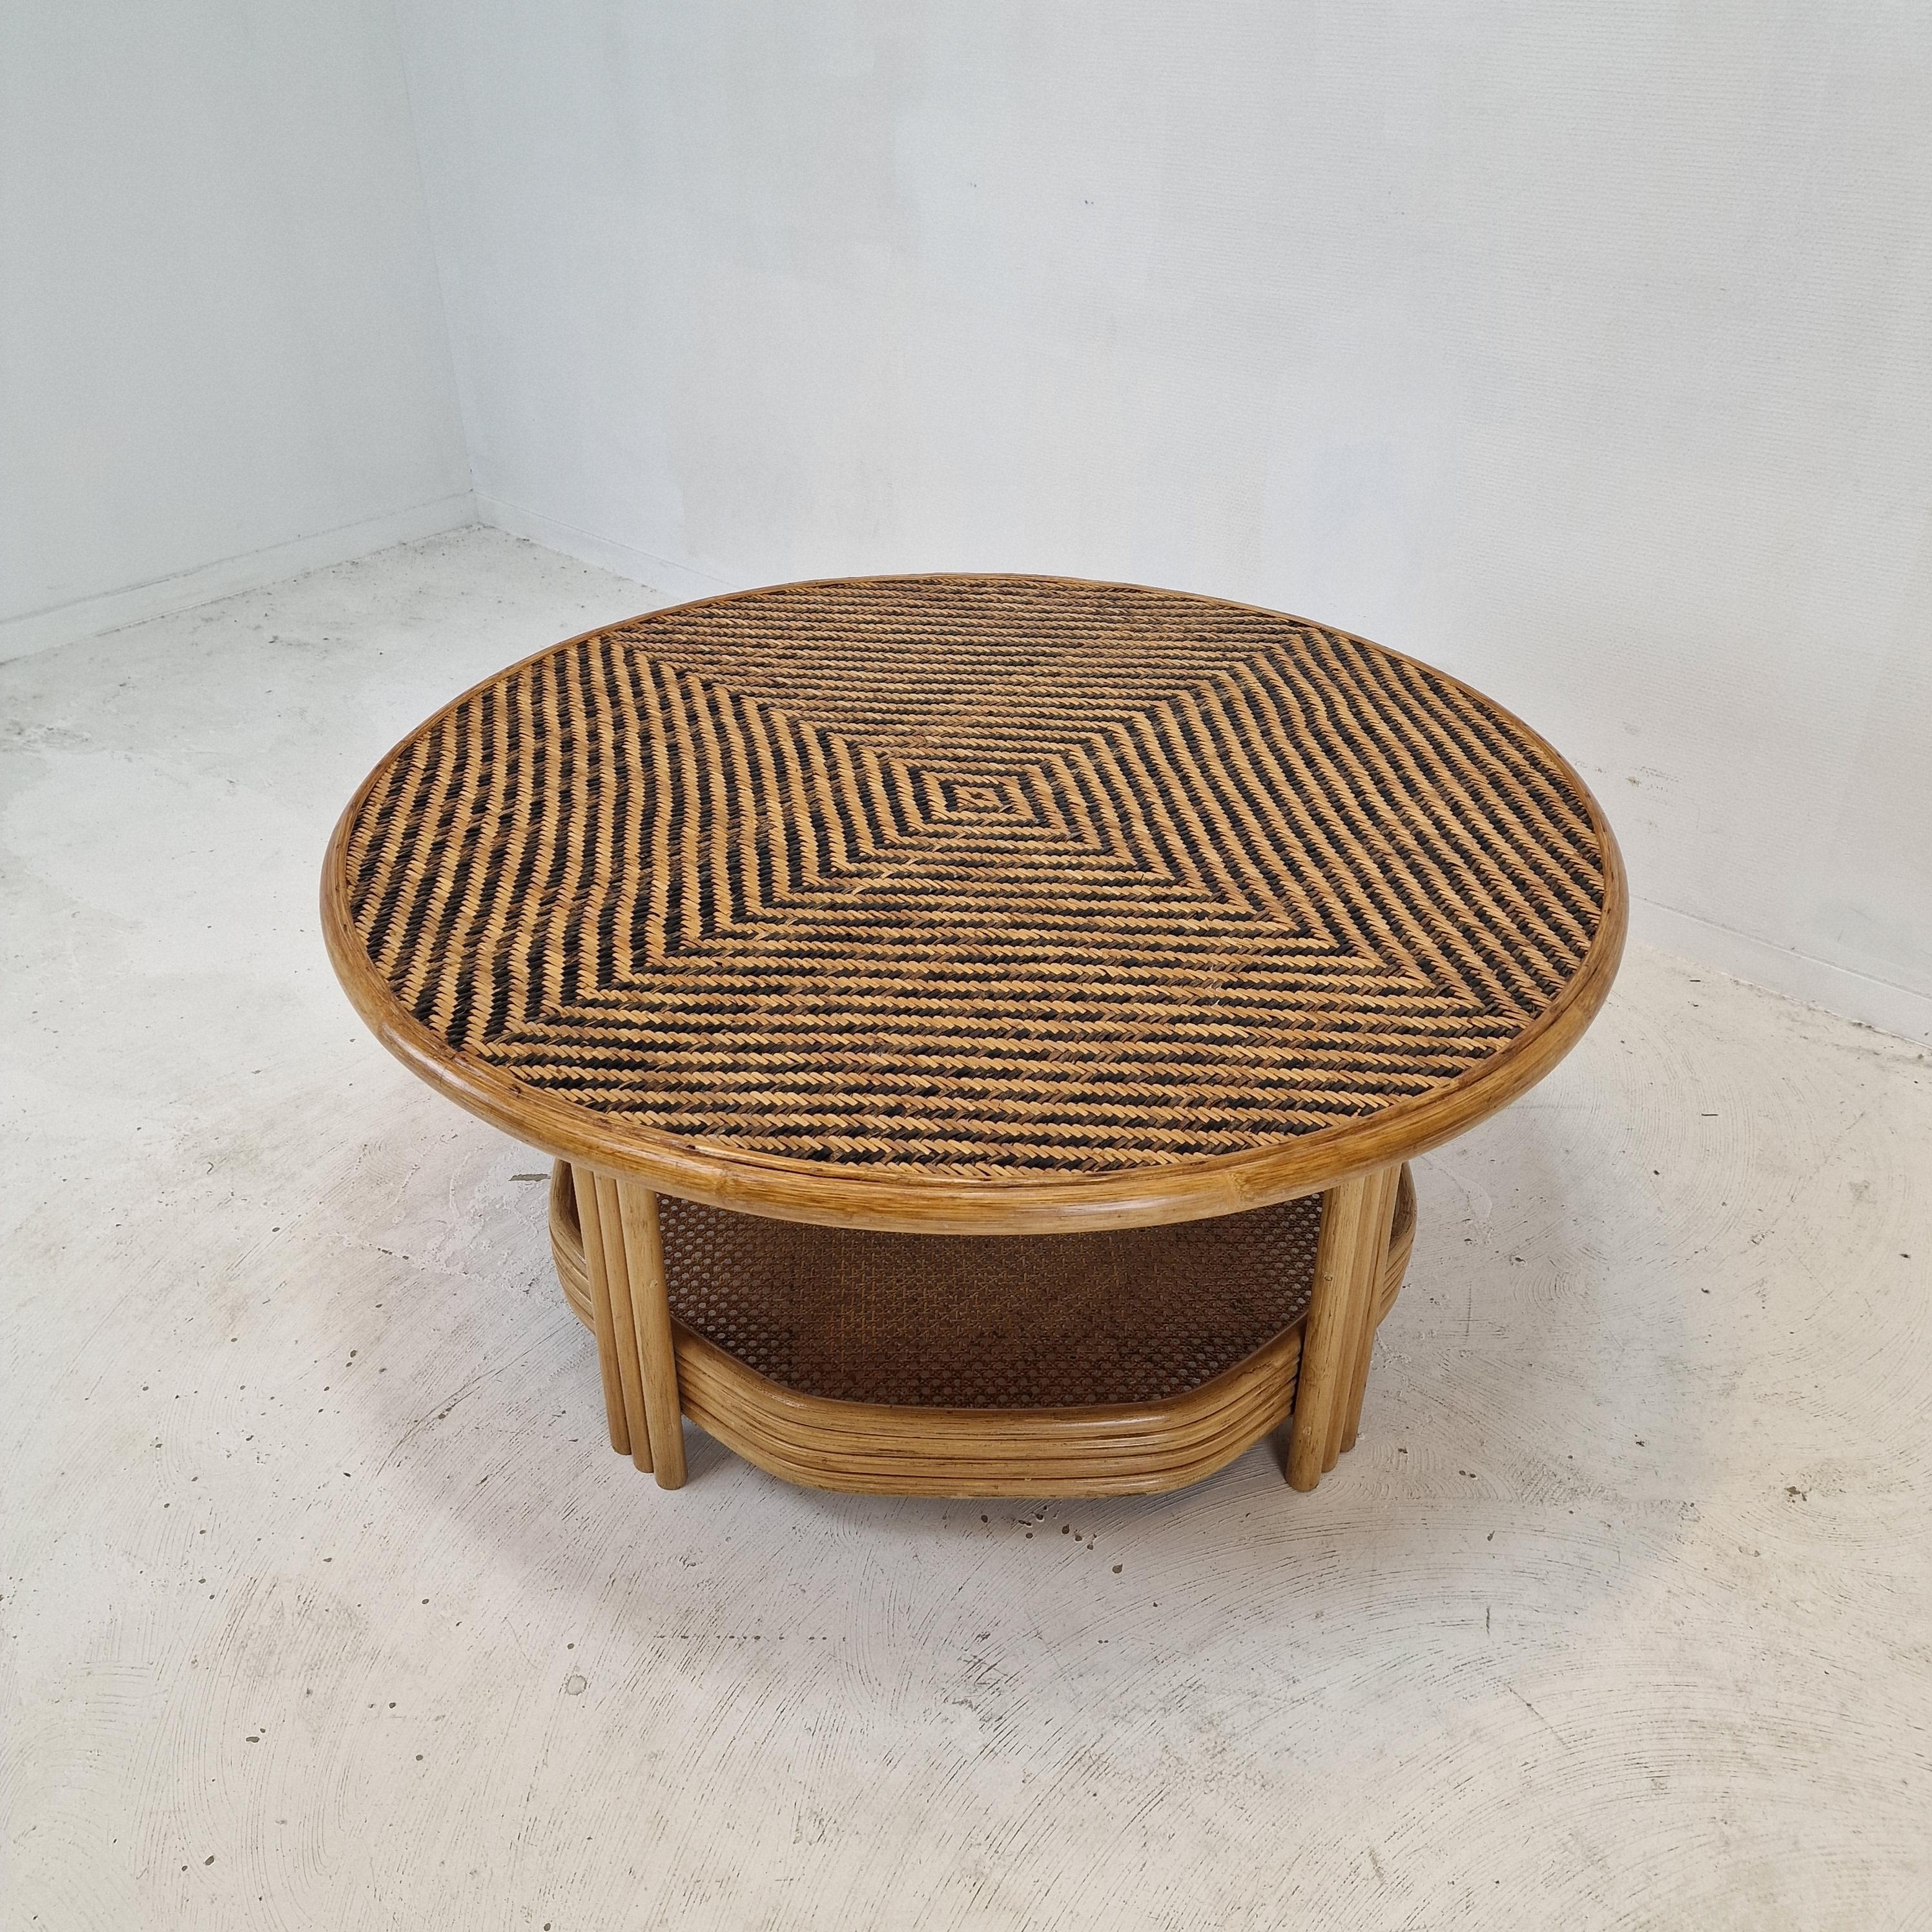 Italian Wicker and Rattan Coffee Table, 1970s For Sale 2